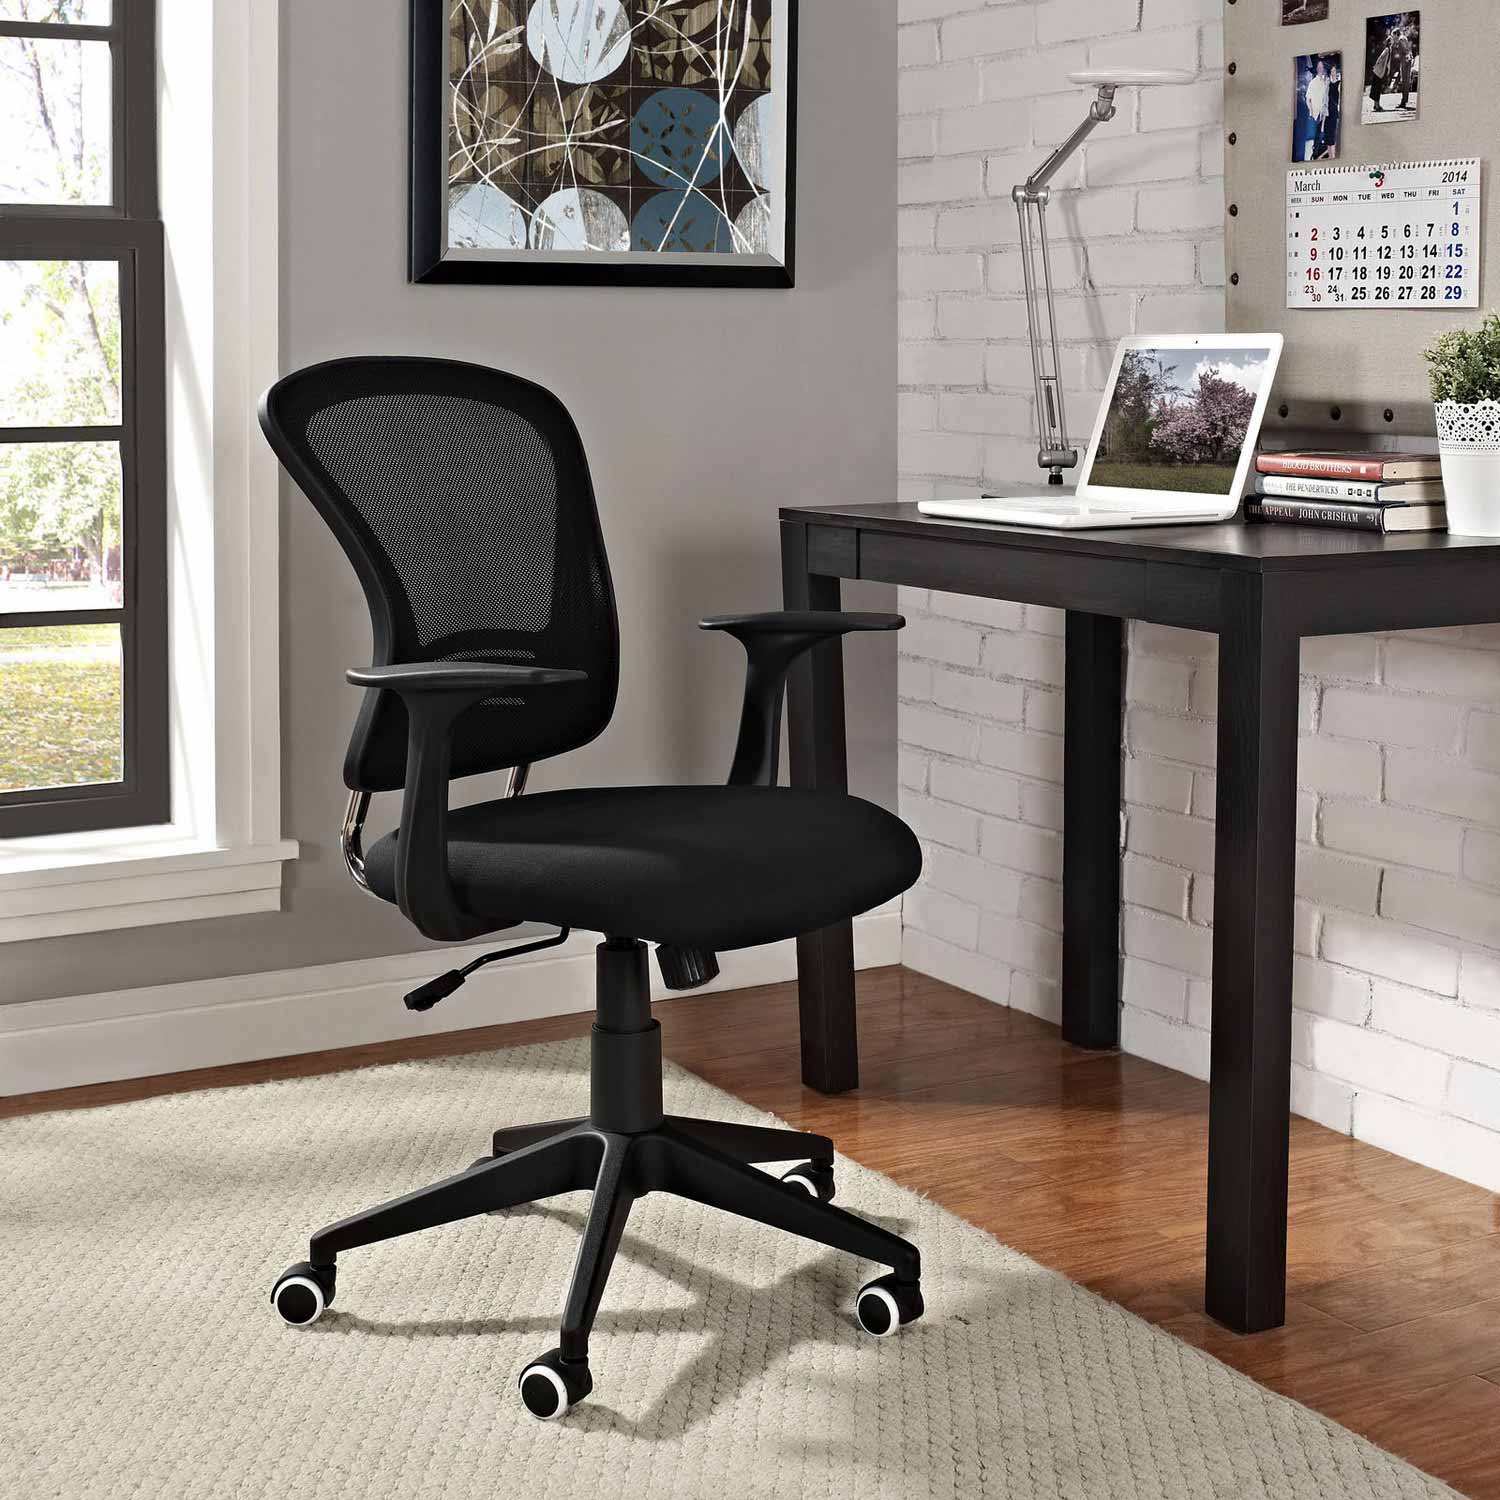 Modway Poise Office Chair - Black